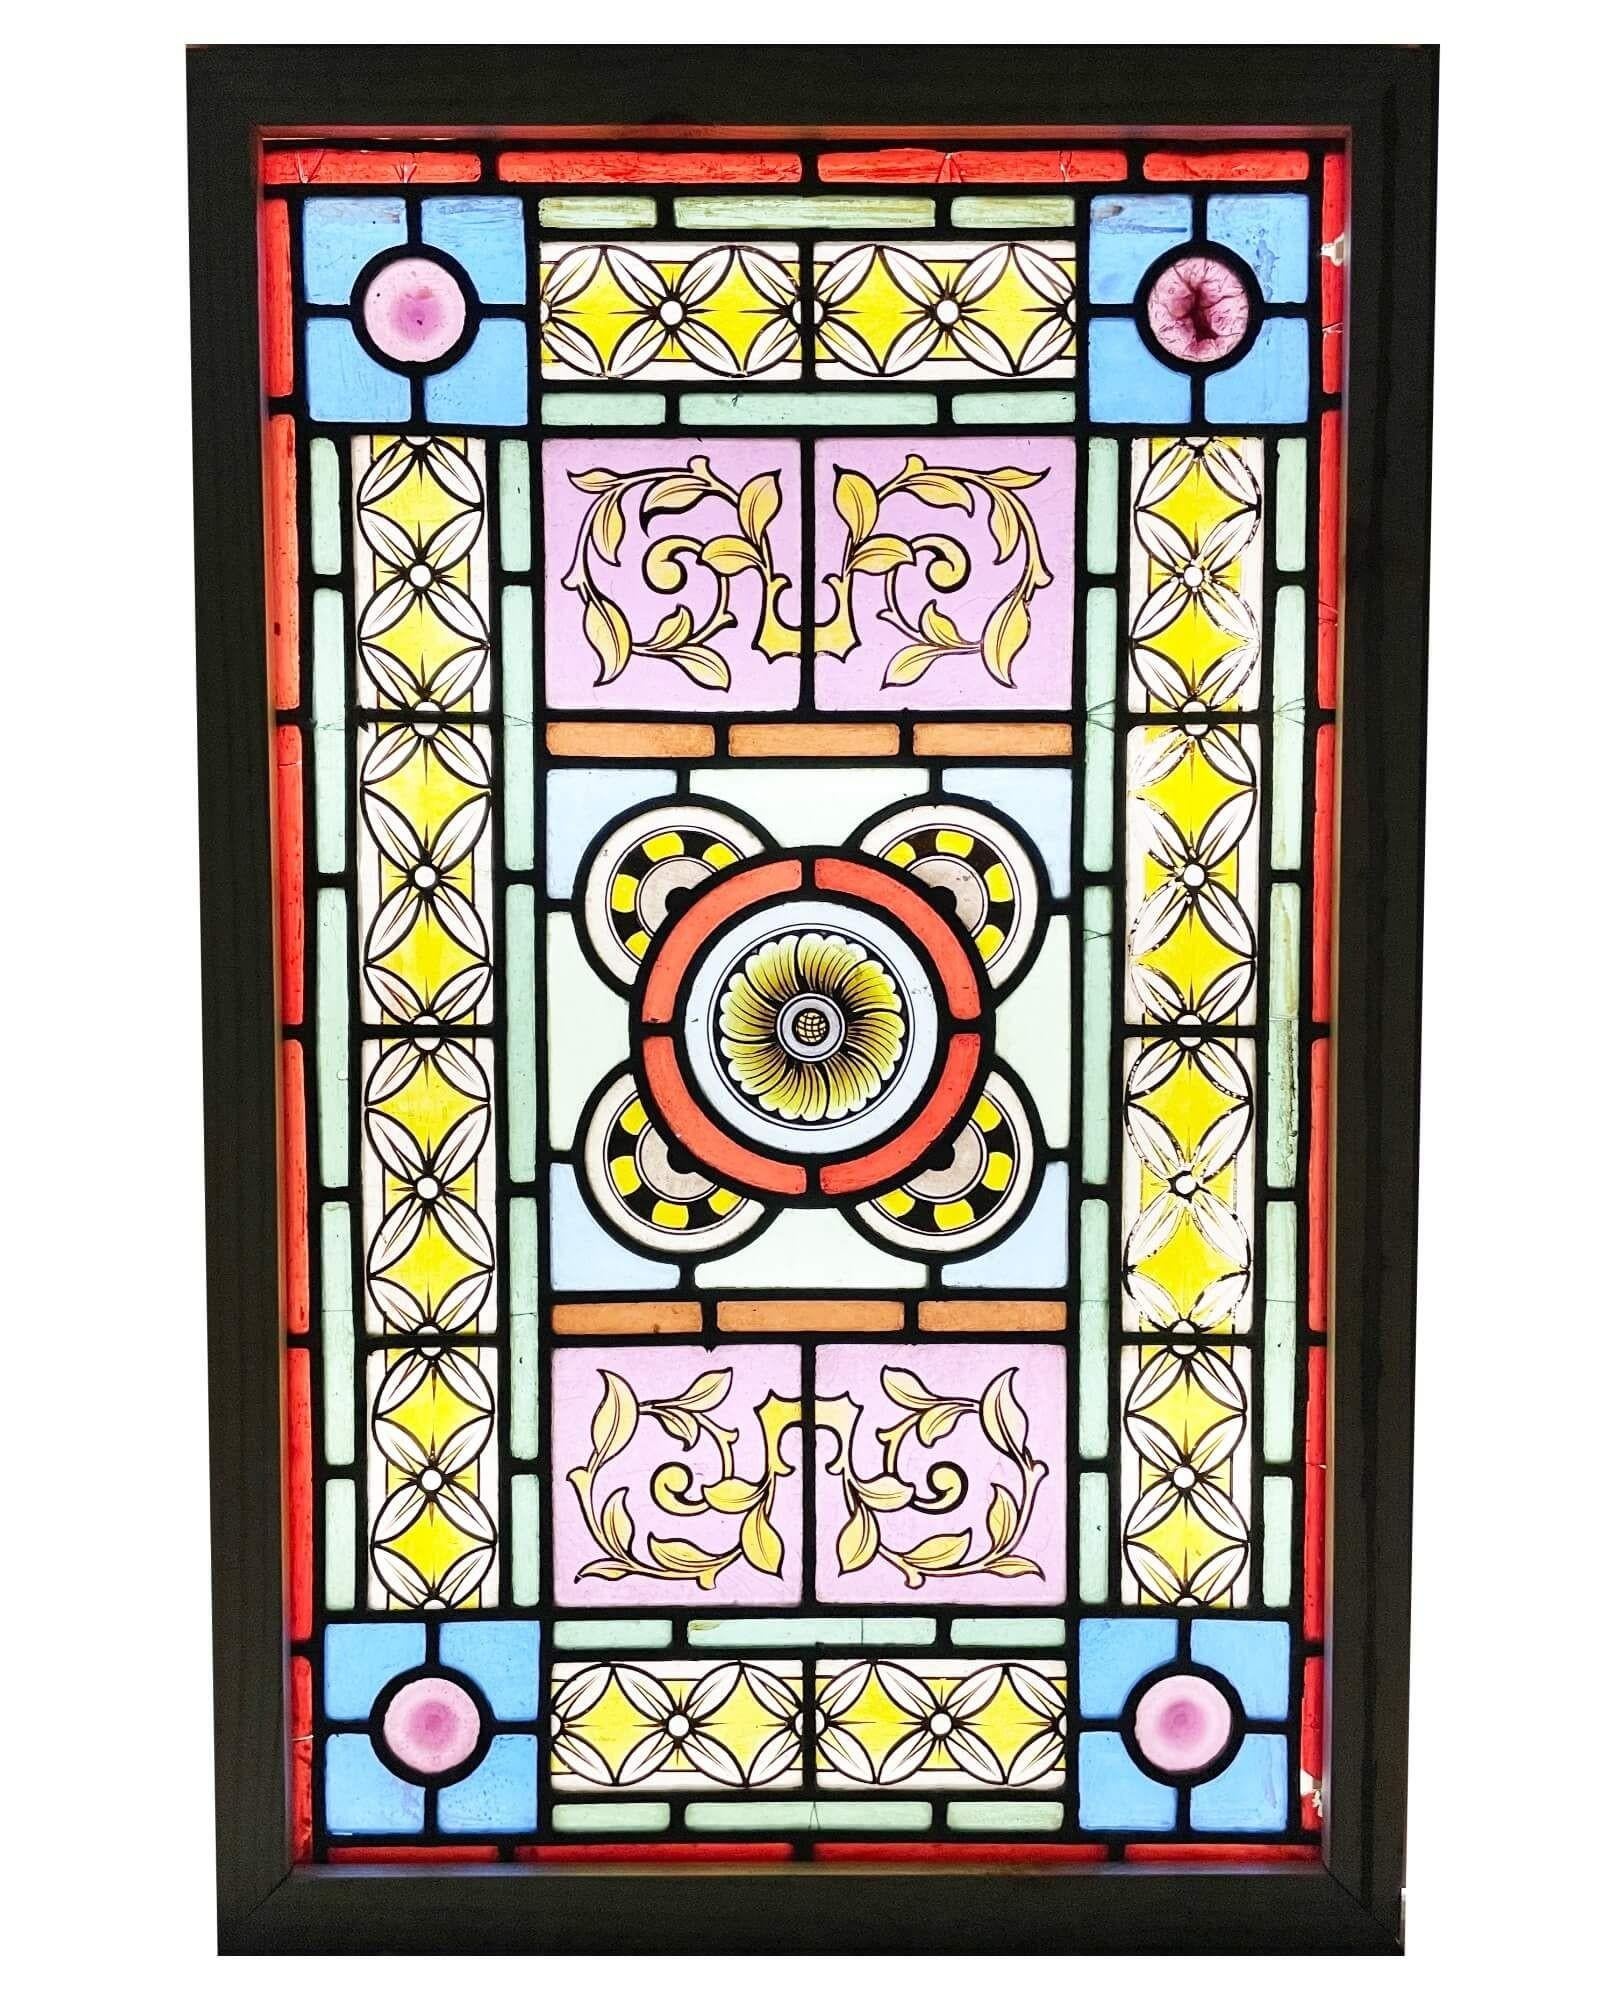 A vibrant antique Victorian floral stained glass window. This beautifully vibrant window dates from the late 19th century, but its intricate eye-catching design would make a spectacular focal point in properties old and new. Its centre holds a four